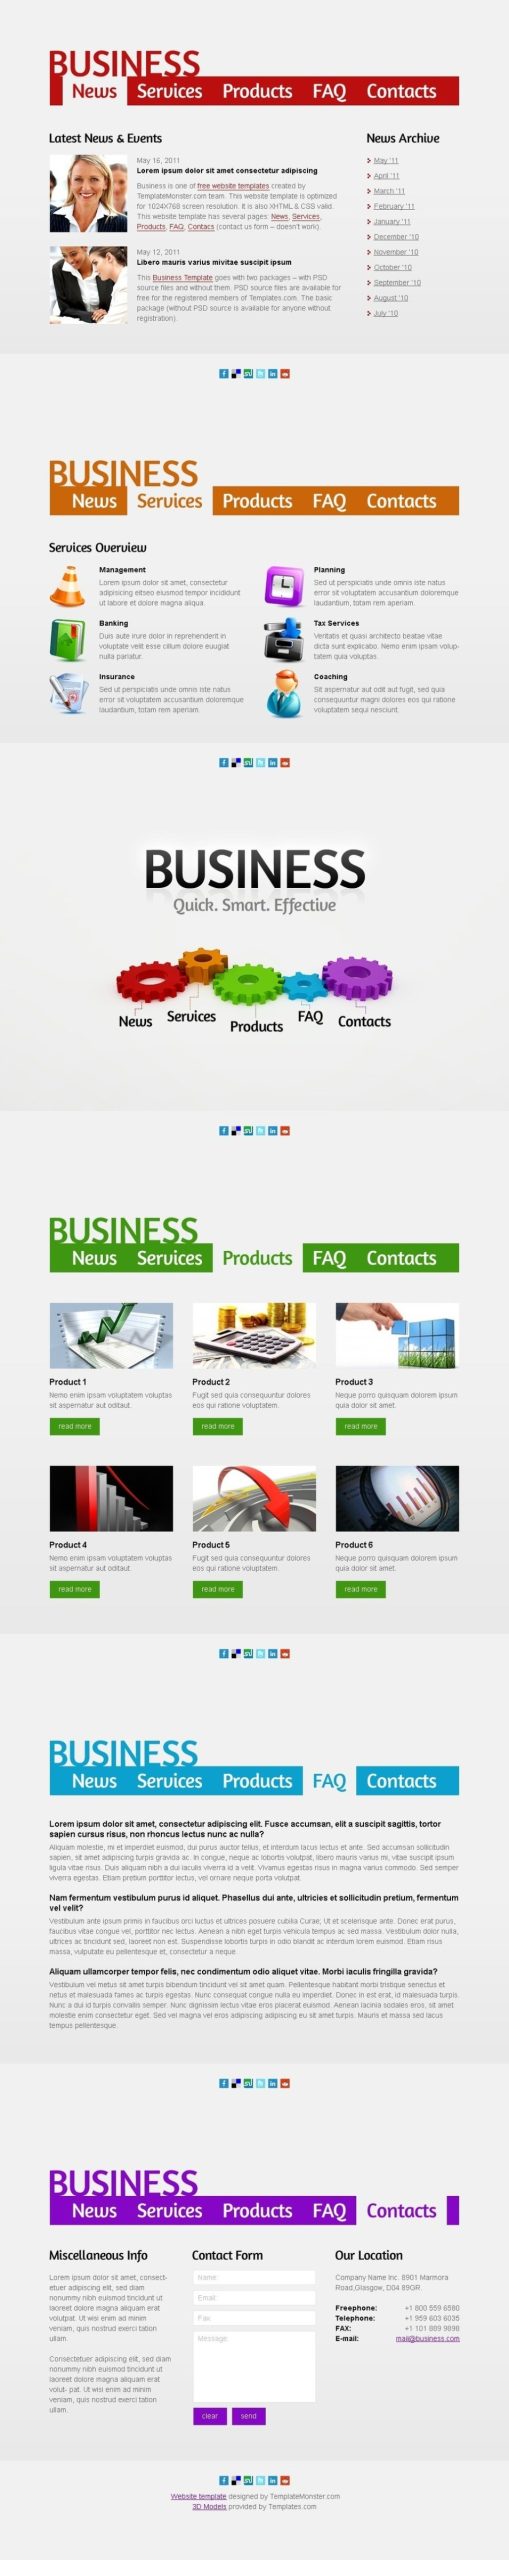 Free Business Web Template – Single Page Layout With Website Templates For Small Business